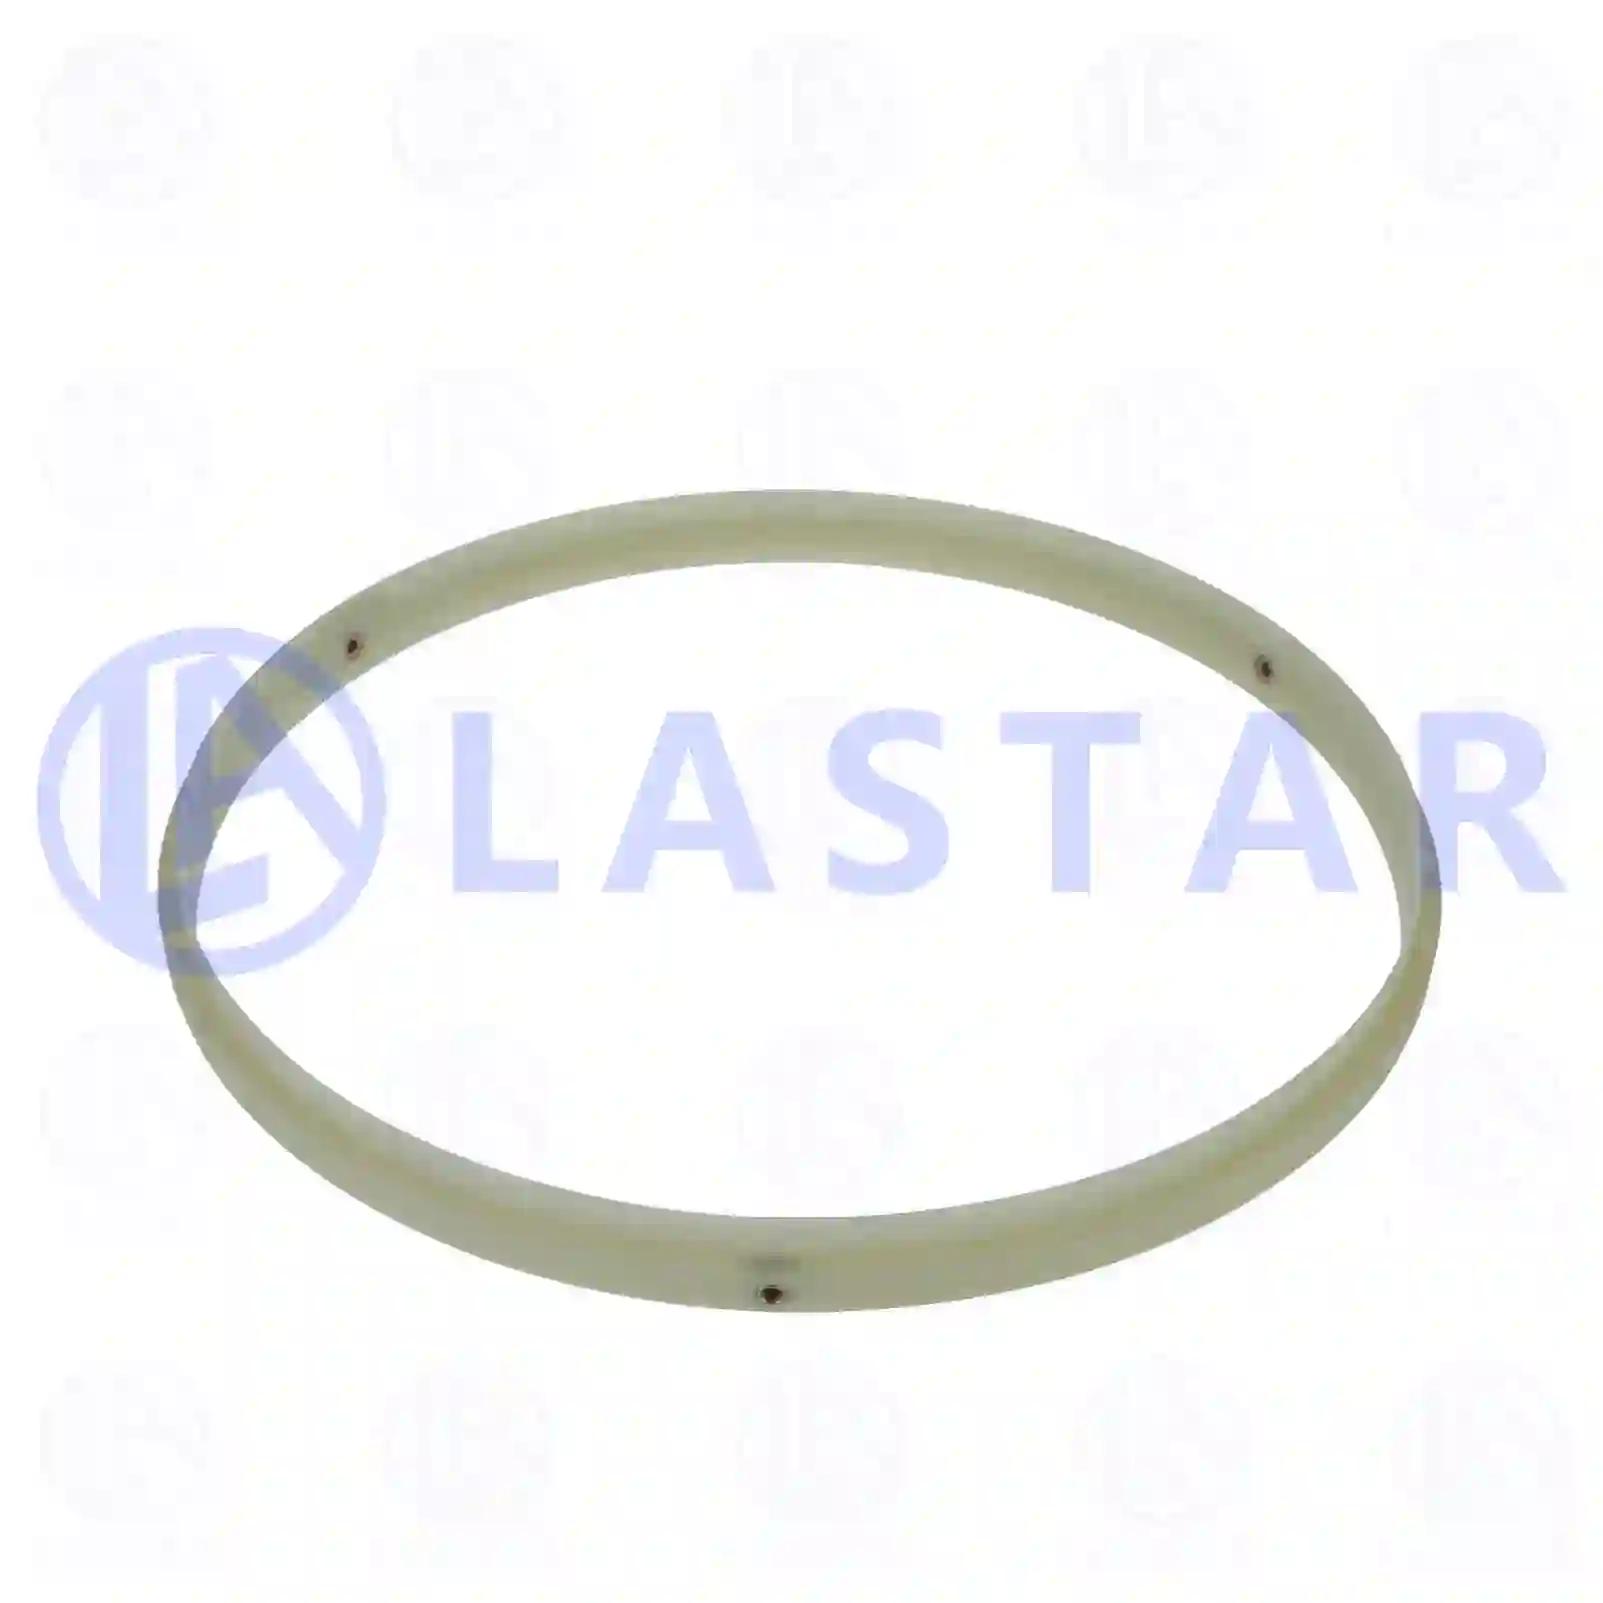 Fan ring, 77707854, 4232000195, 4422 ||  77707854 Lastar Spare Part | Truck Spare Parts, Auotomotive Spare Parts Fan ring, 77707854, 4232000195, 4422 ||  77707854 Lastar Spare Part | Truck Spare Parts, Auotomotive Spare Parts